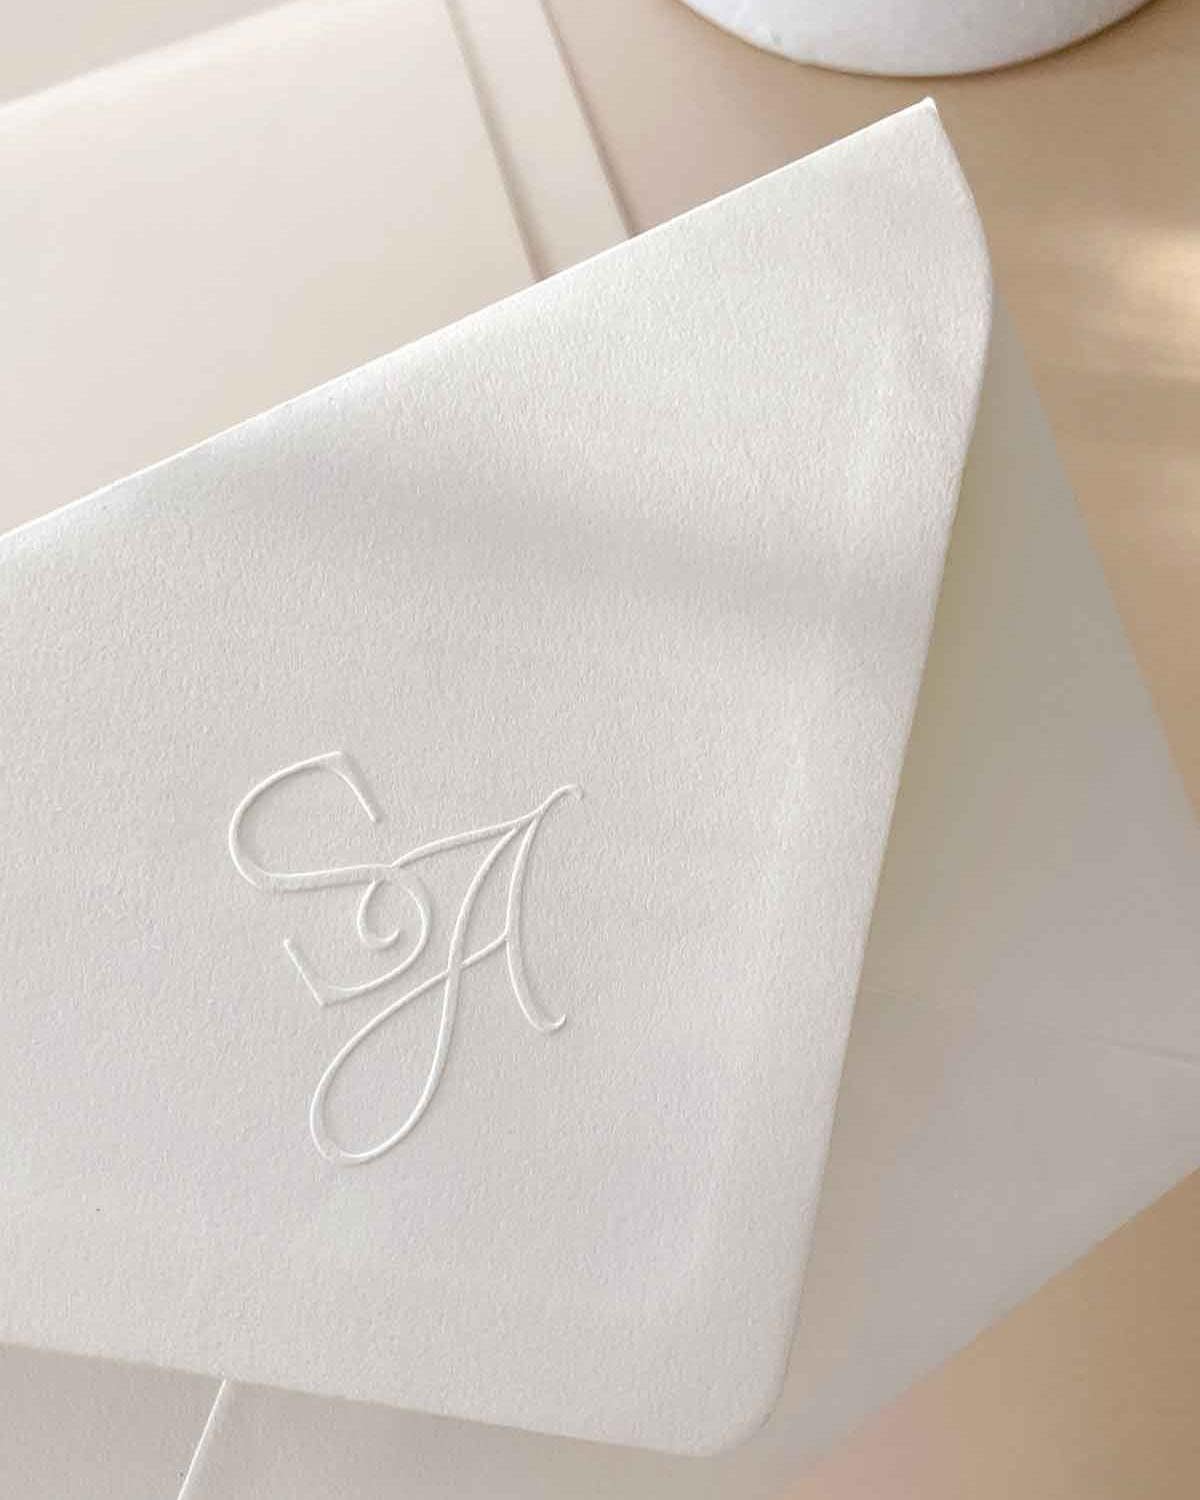 White Matte Embossed Stickers, Embossed Raised Sticker/label, Embossing  Seal Stickers, Foil/metallic Seal, Business/wedding/gift Stickers 